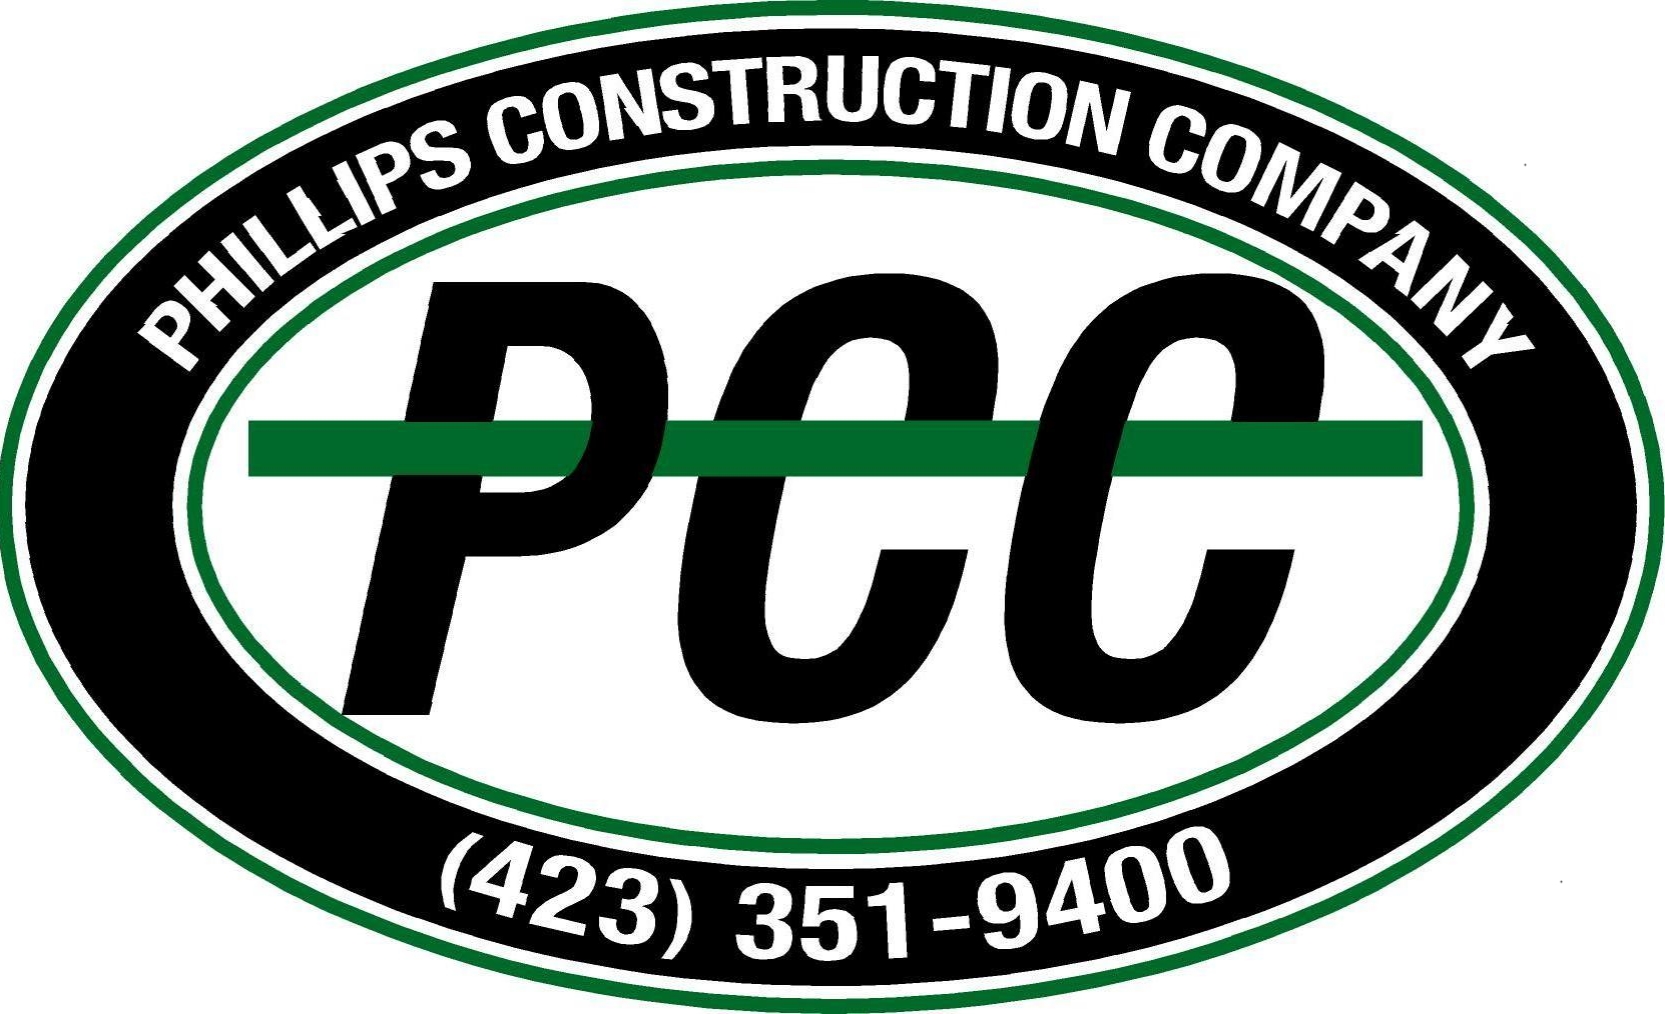 Phillips Construction 406 Sweetwater Vonore Rd, Sweetwater Tennessee 37874